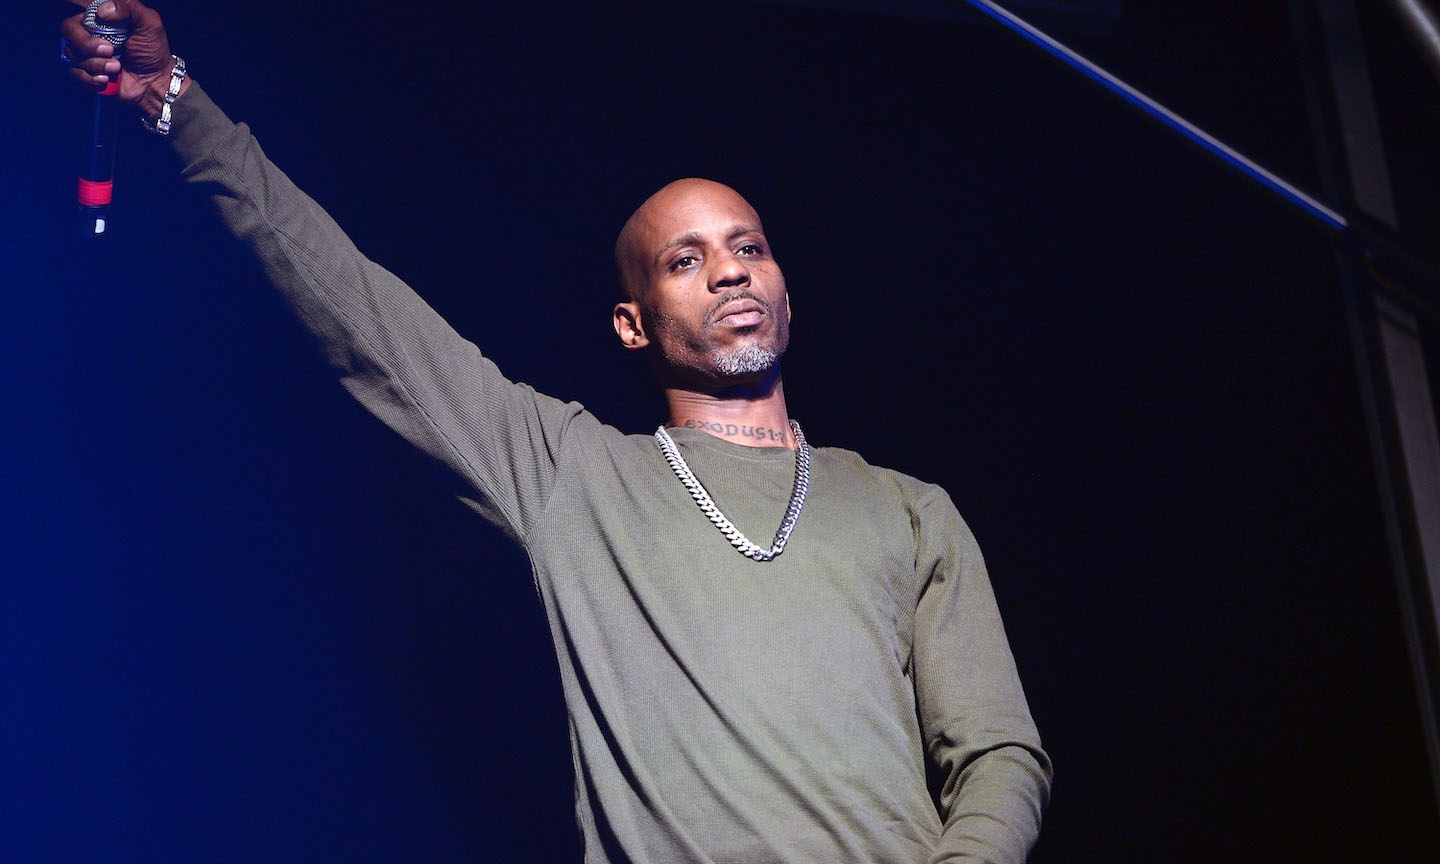 DMX’s Team Creates Official TikTok Channel To Promote ‘X-ecember’